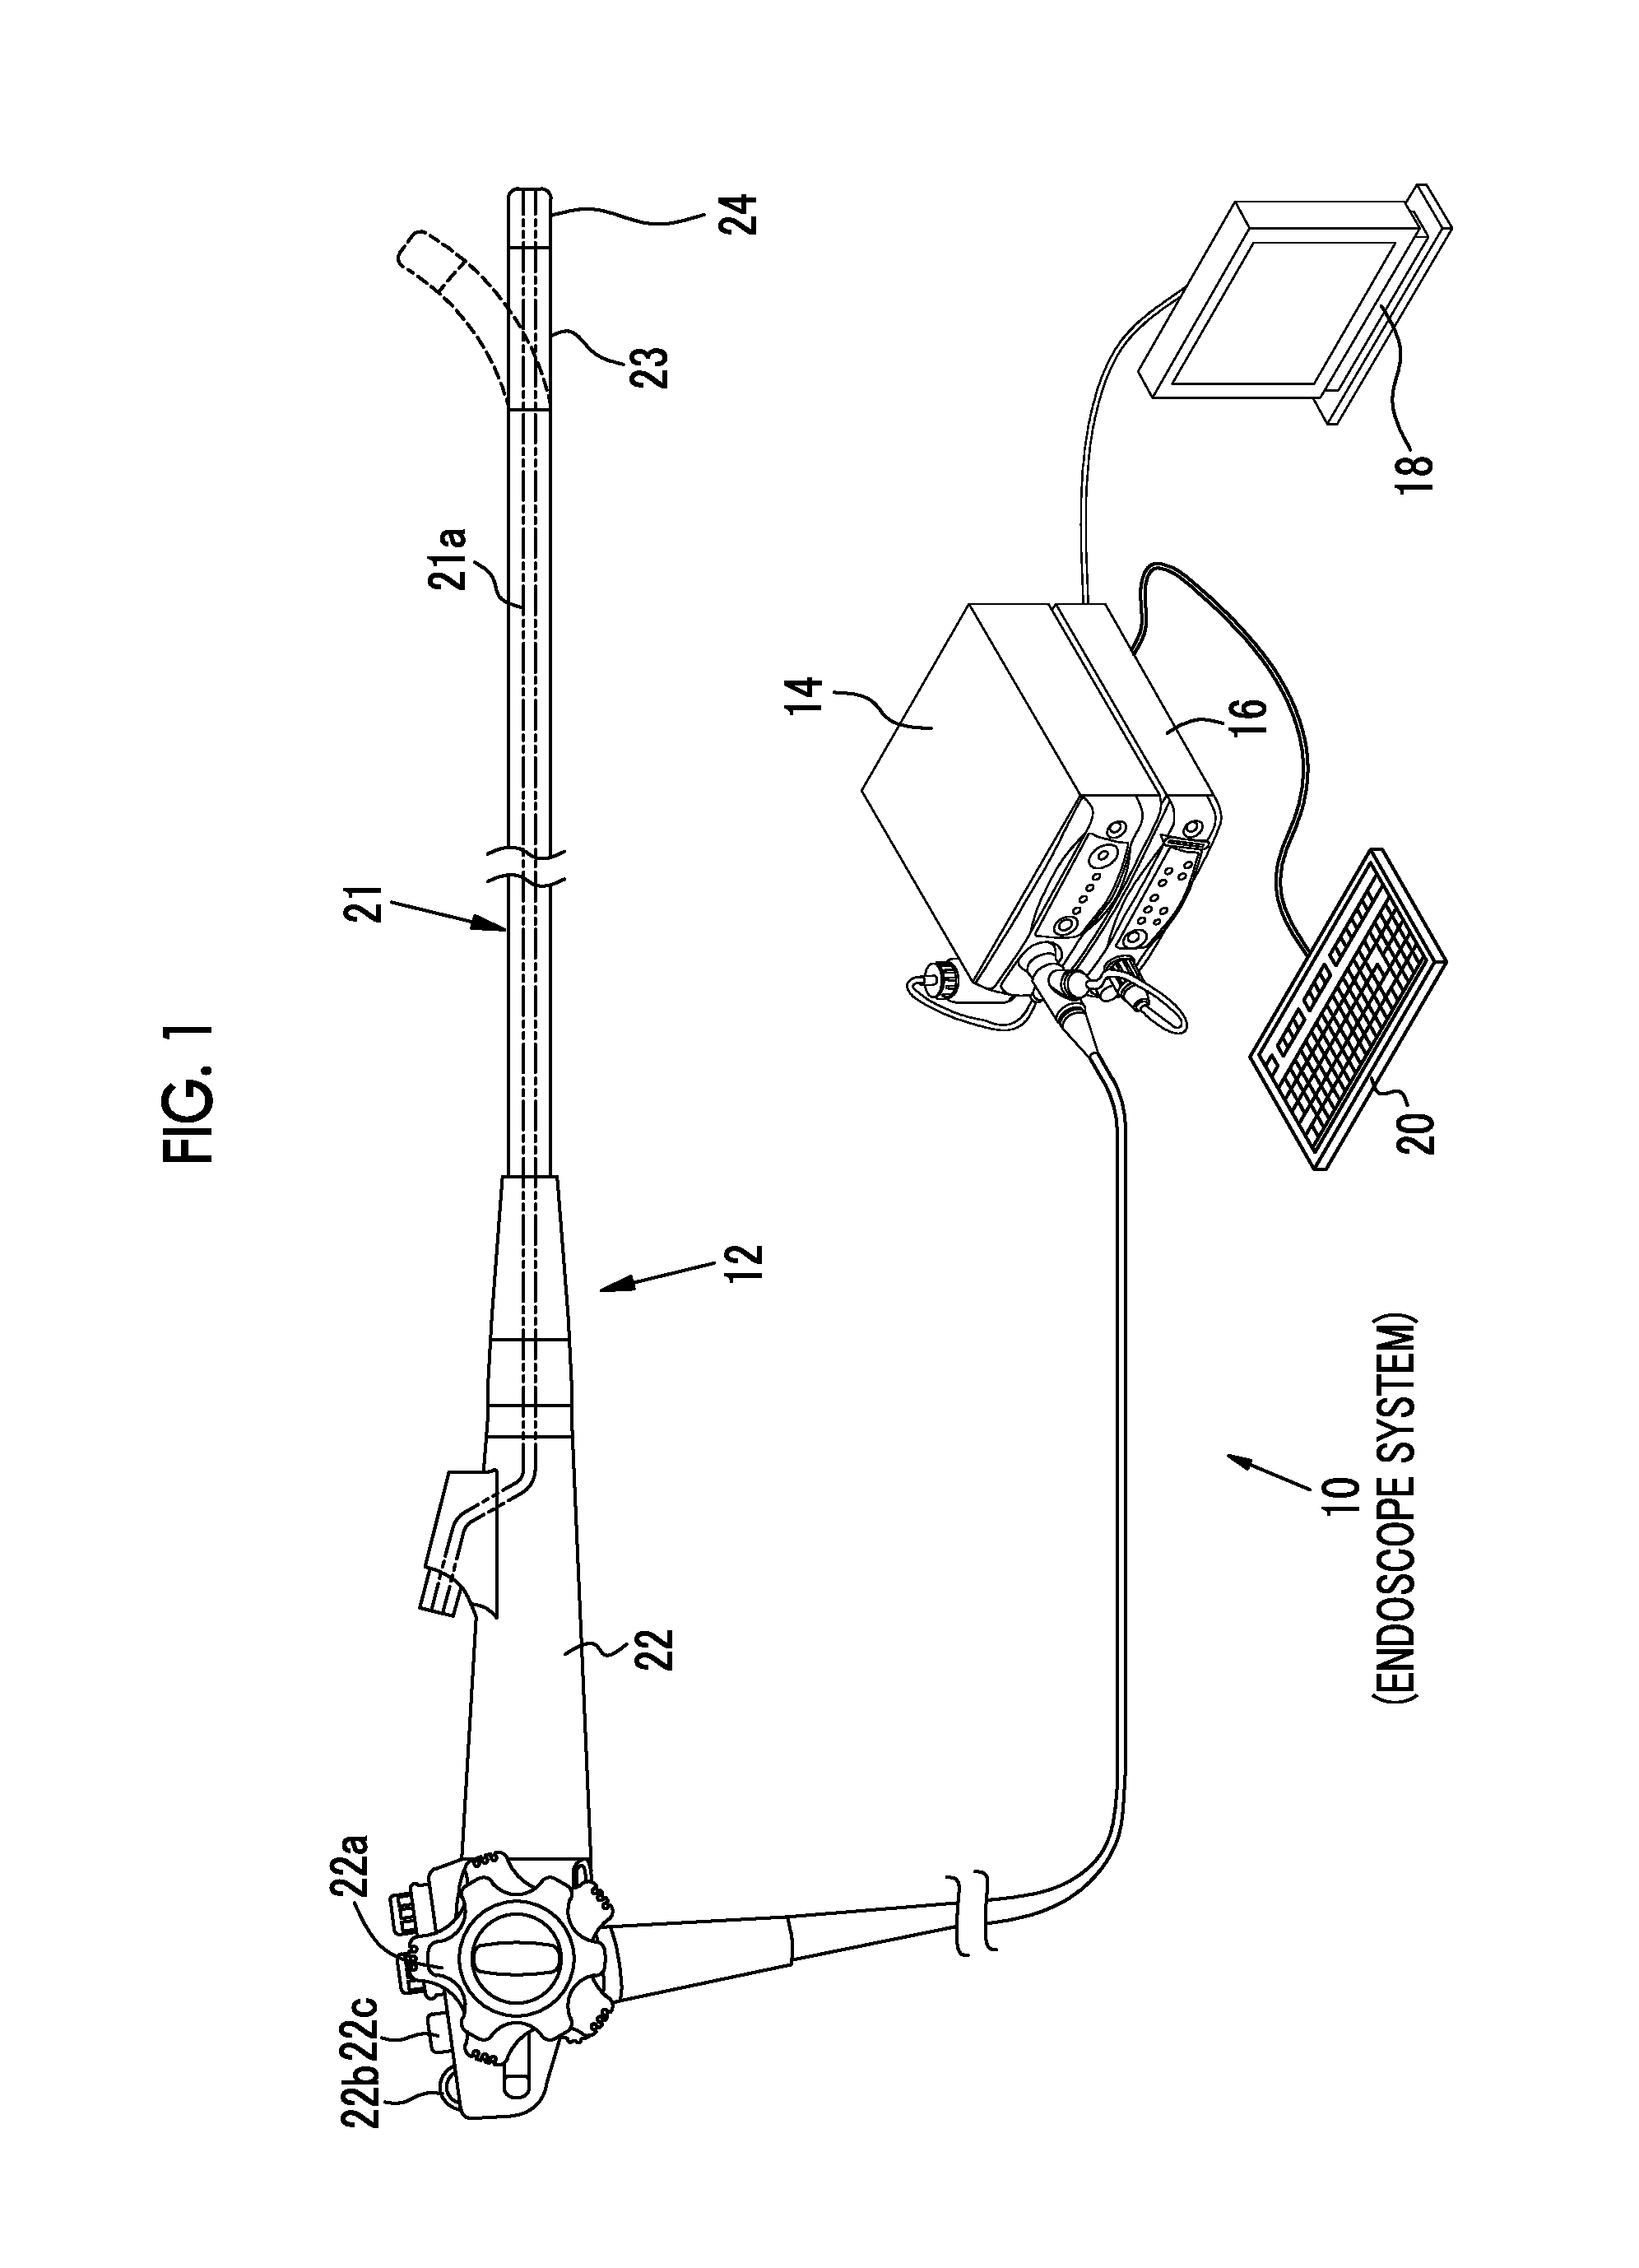 Endoscope system, processor device, operation method, and distance measurement device